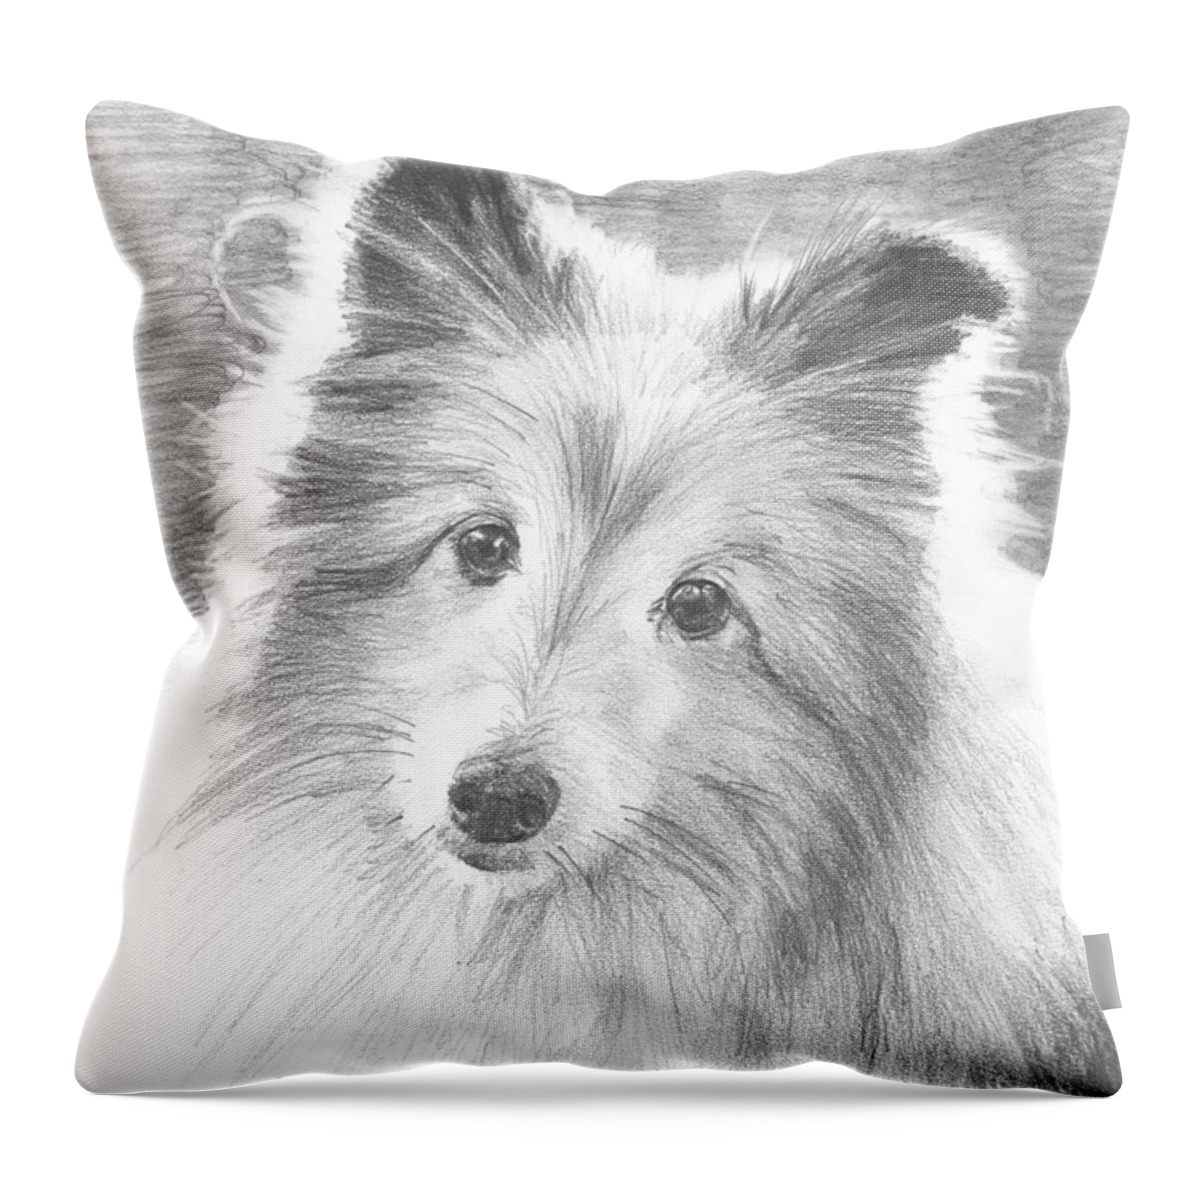 <a Href=http://miketheuer.com Target =_blank>www.miketheuer.com</a> Sheltie Dog Pencil Portrait Mike Theuer Throw Pillow featuring the drawing Sheltie Dog Pencil Portrait by Mike Theuer